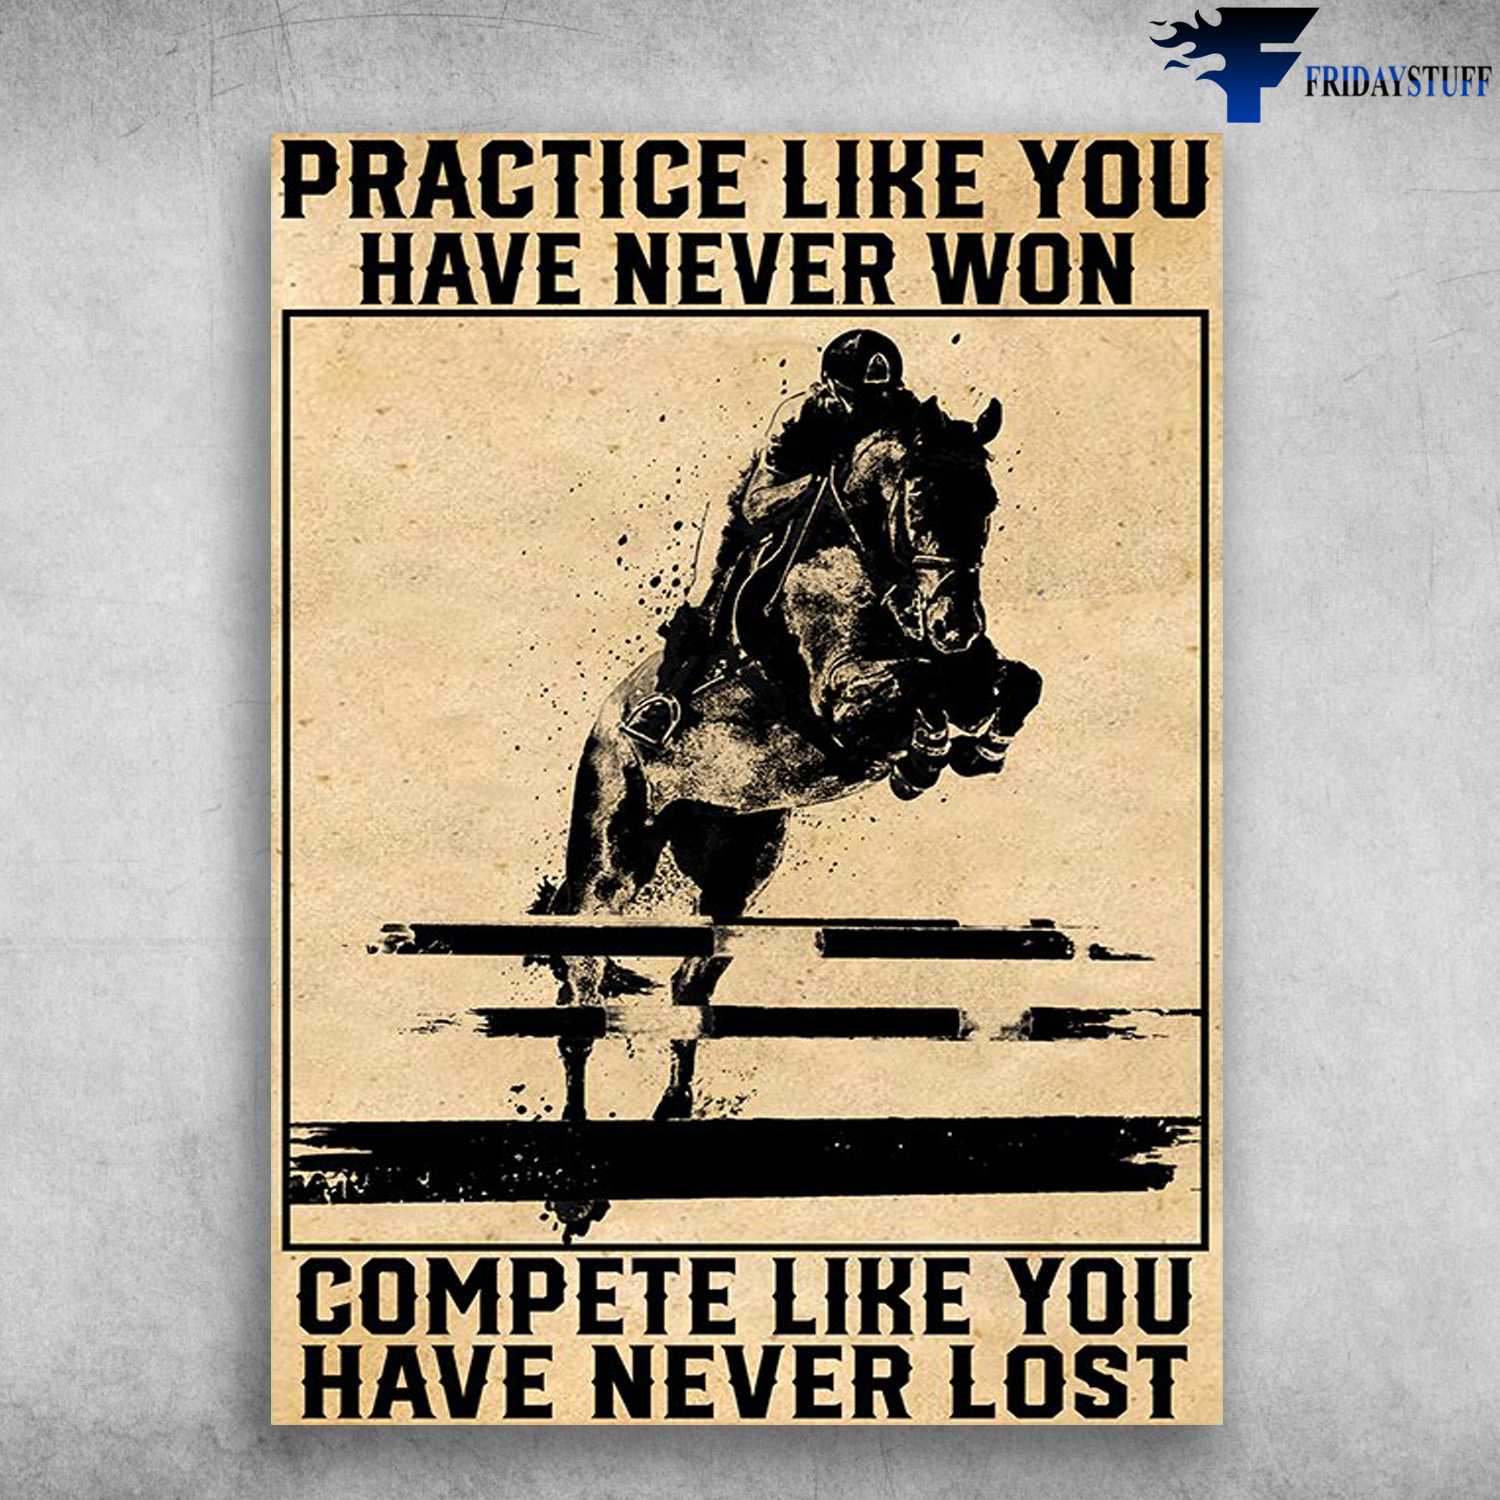 Horse Riding, Practice Like You Have Never Won, Complete Like You Have Never Lost